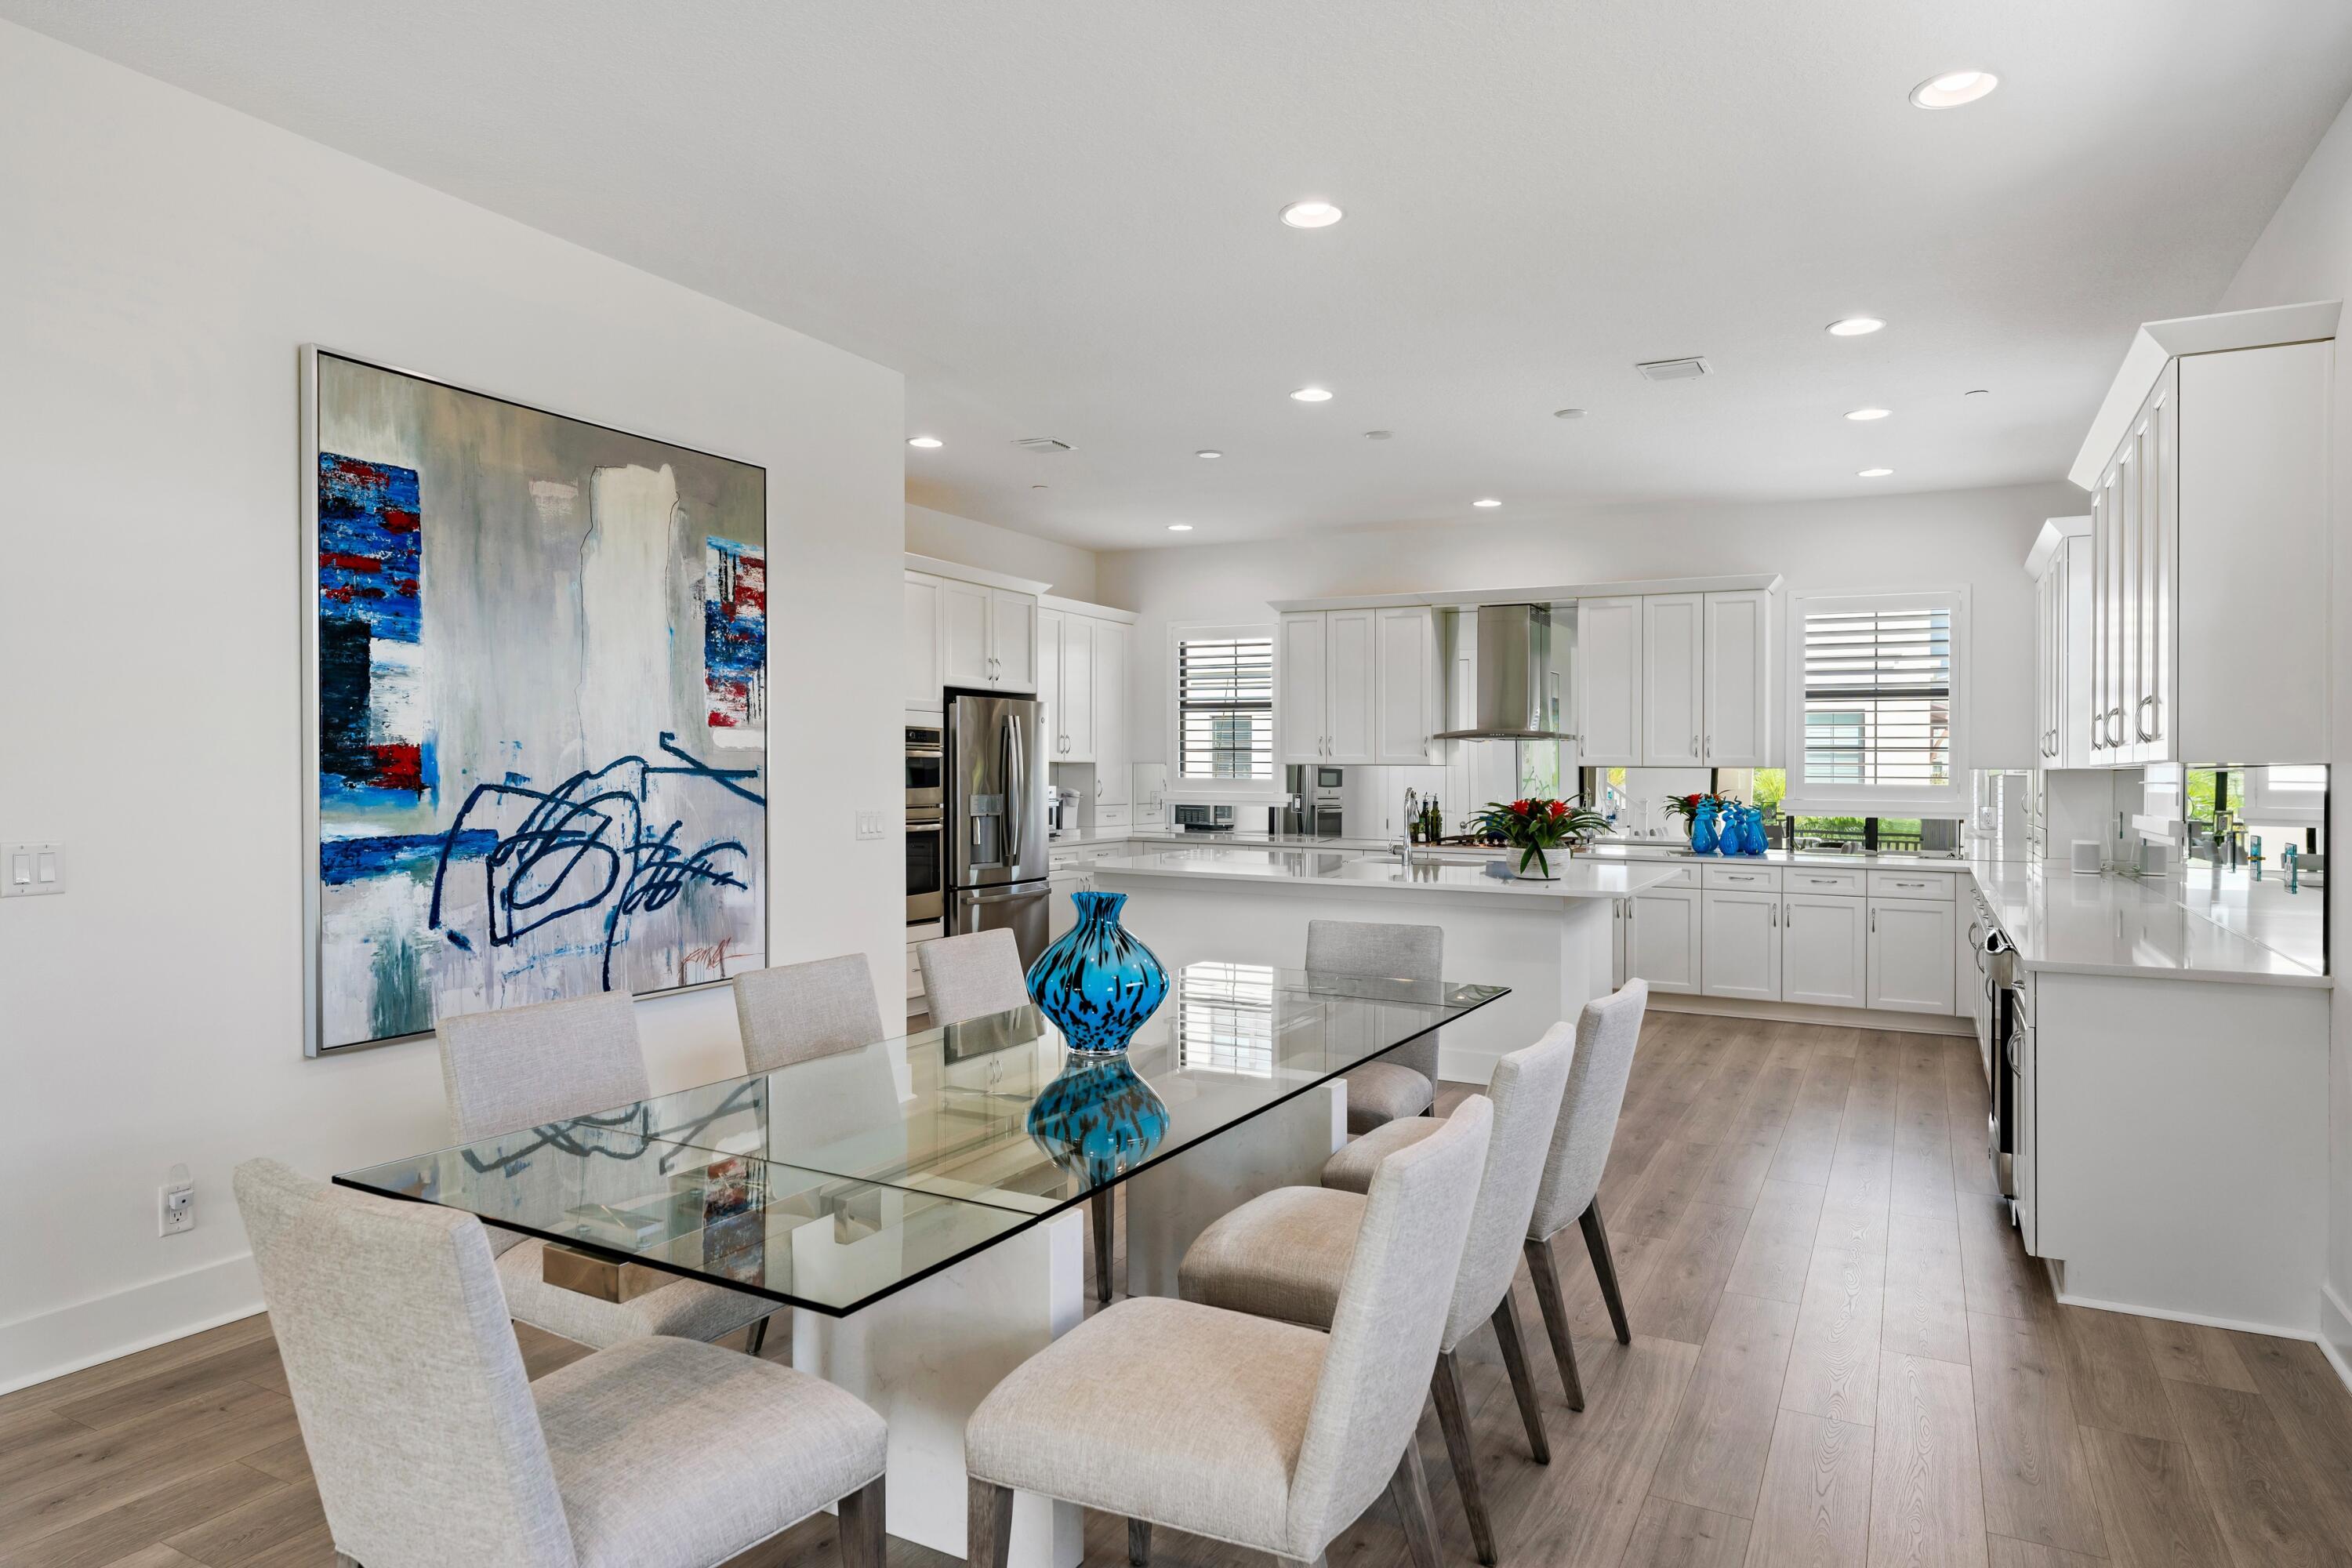 a dining room with stainless steel appliances kitchen island granite countertop a dining table chairs and view kitchen